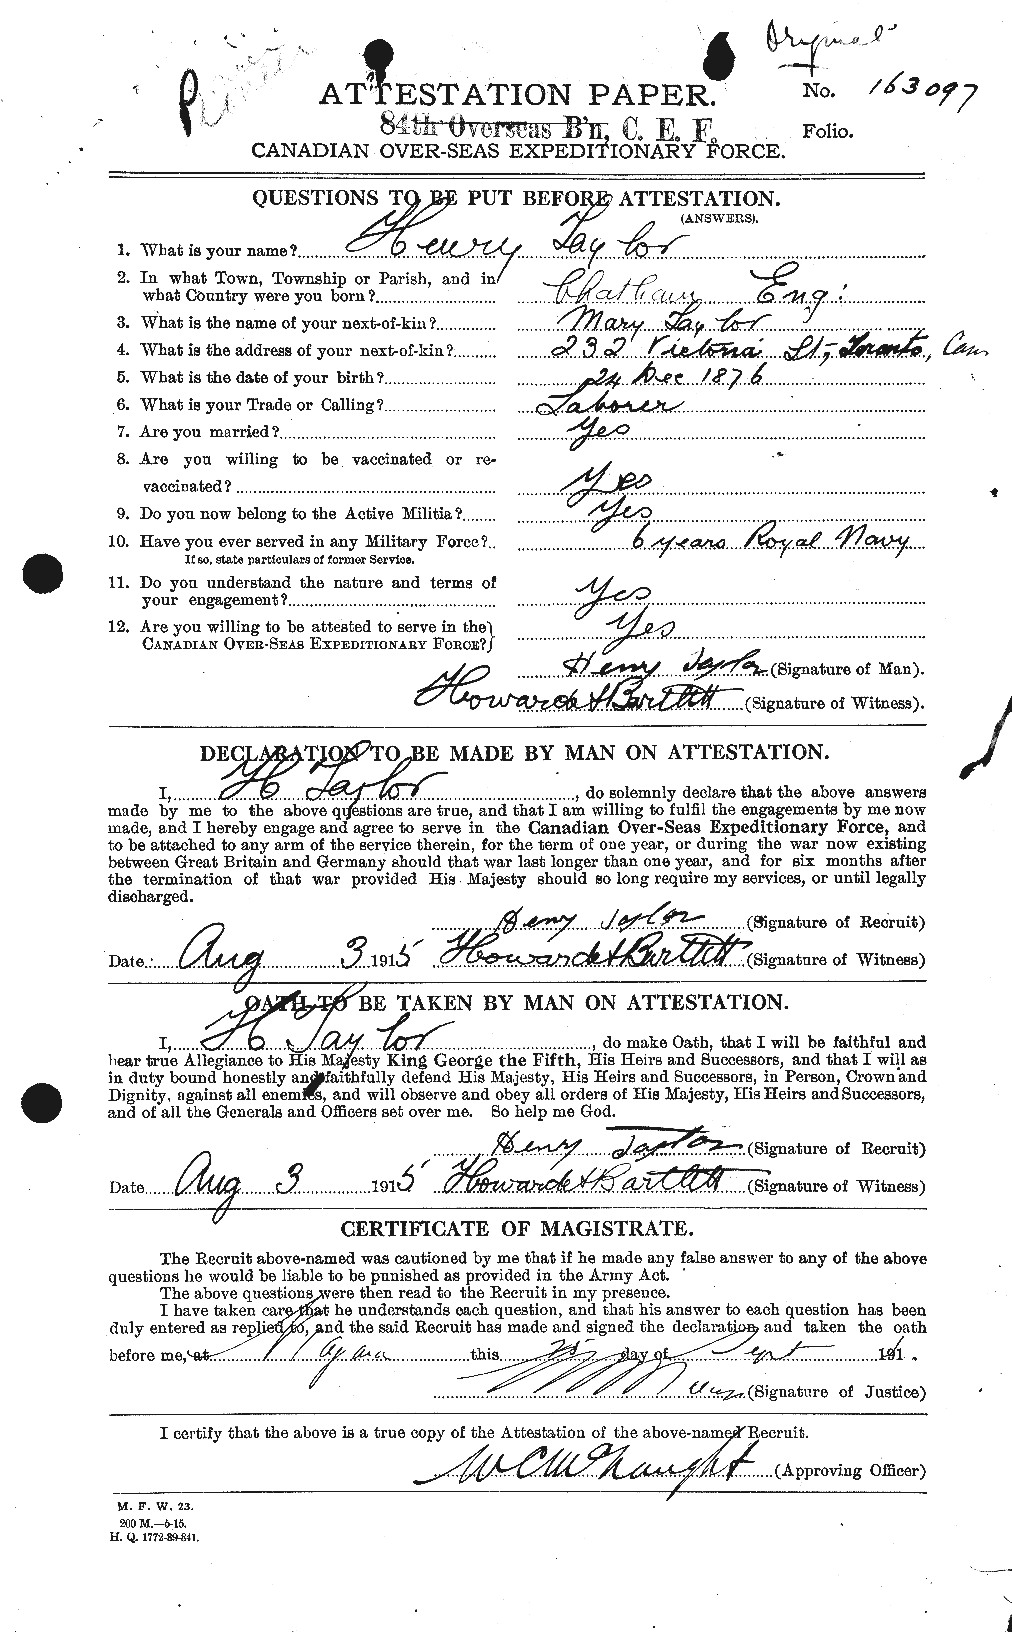 Personnel Records of the First World War - CEF 626526a